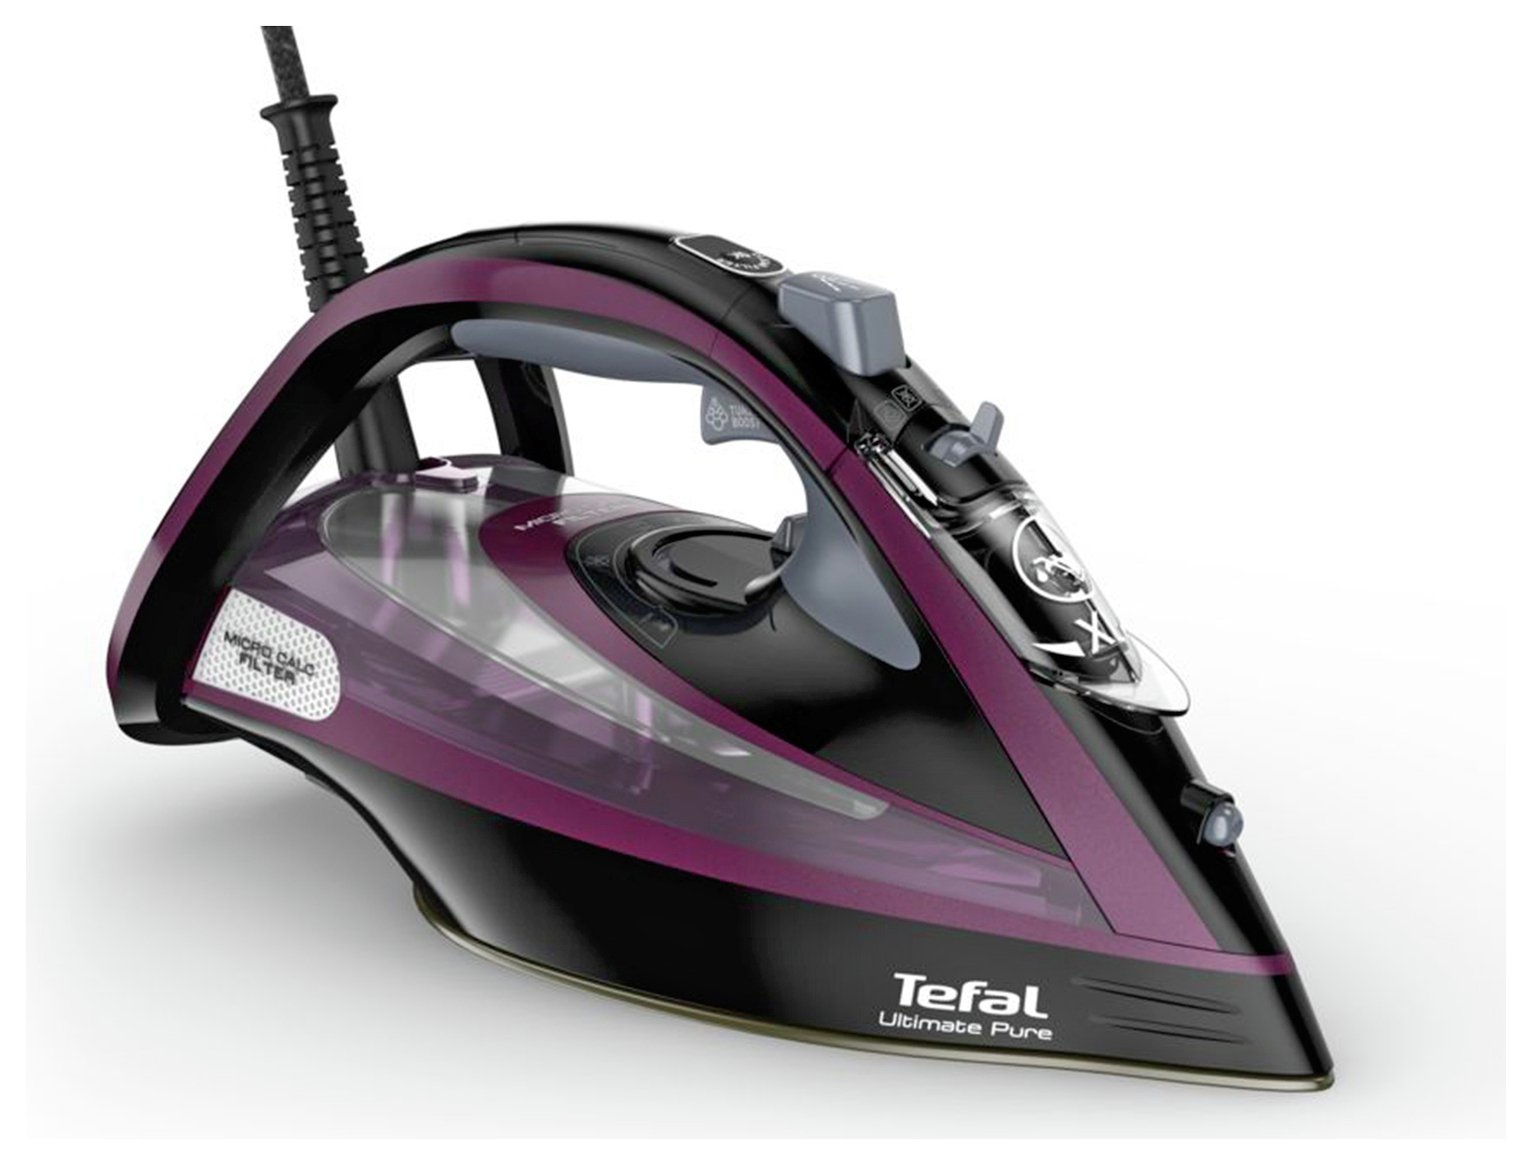 Tefal Ultimate Pure FV9830 Steam Iron